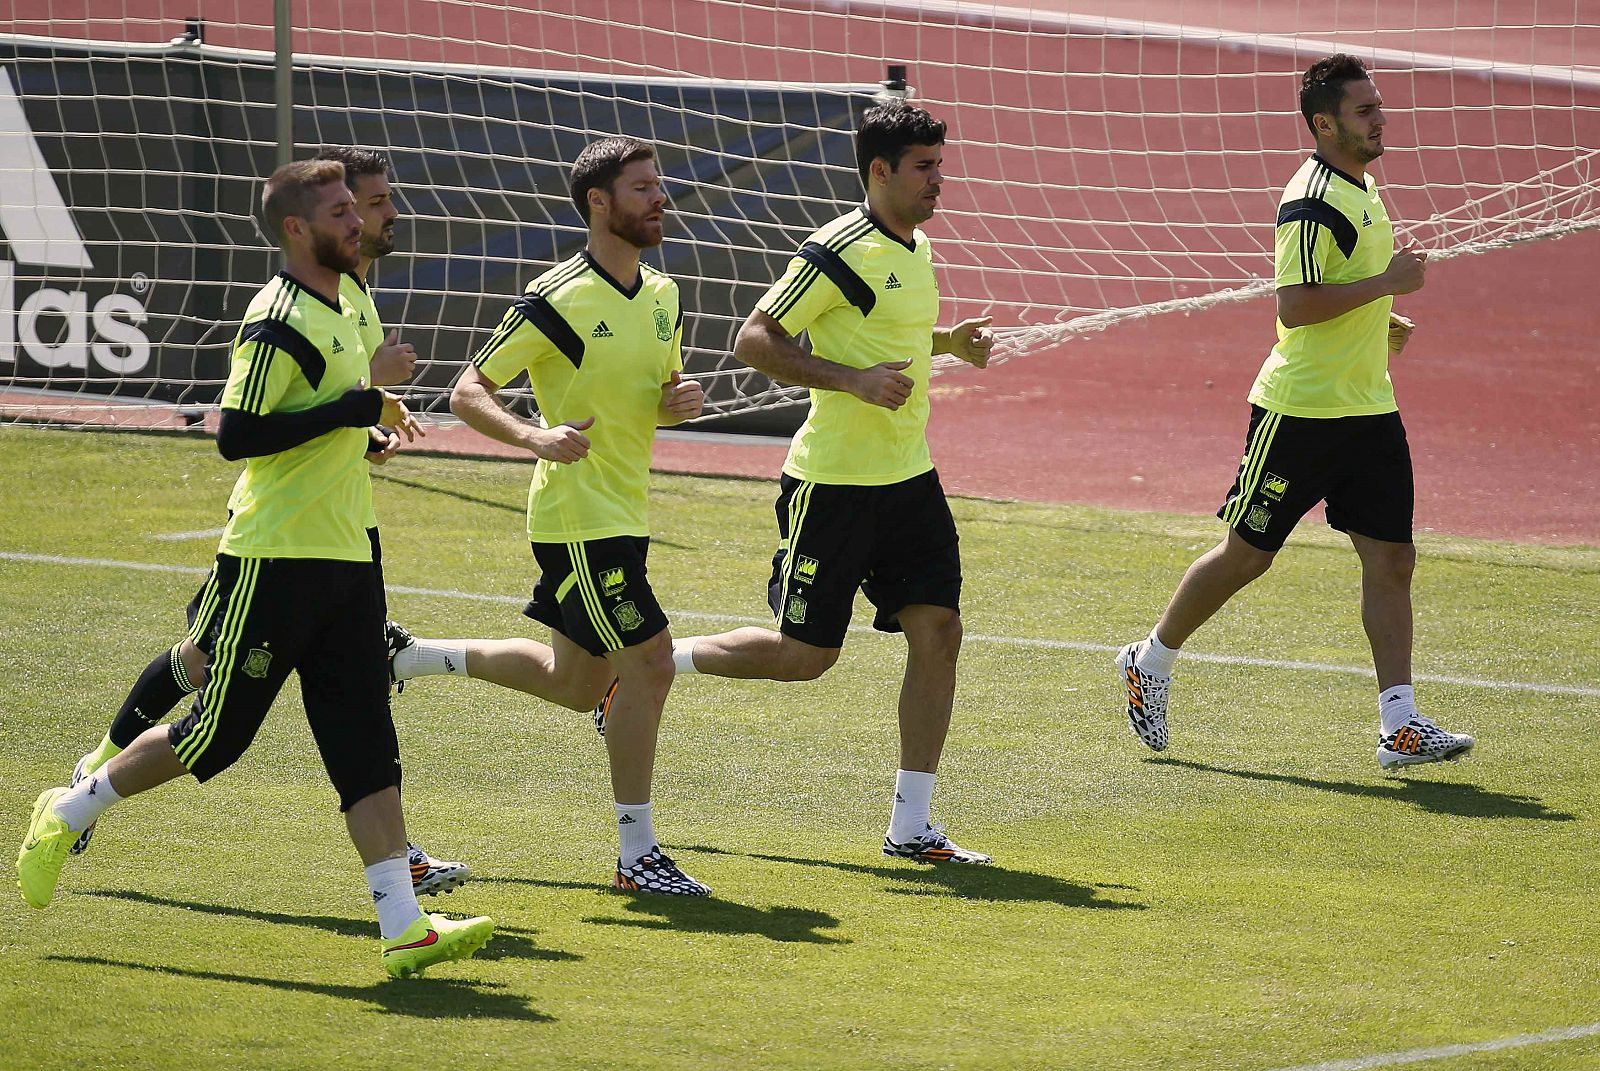 Spanish national soccer players run during a training session at Las Rozas playground near Madrid